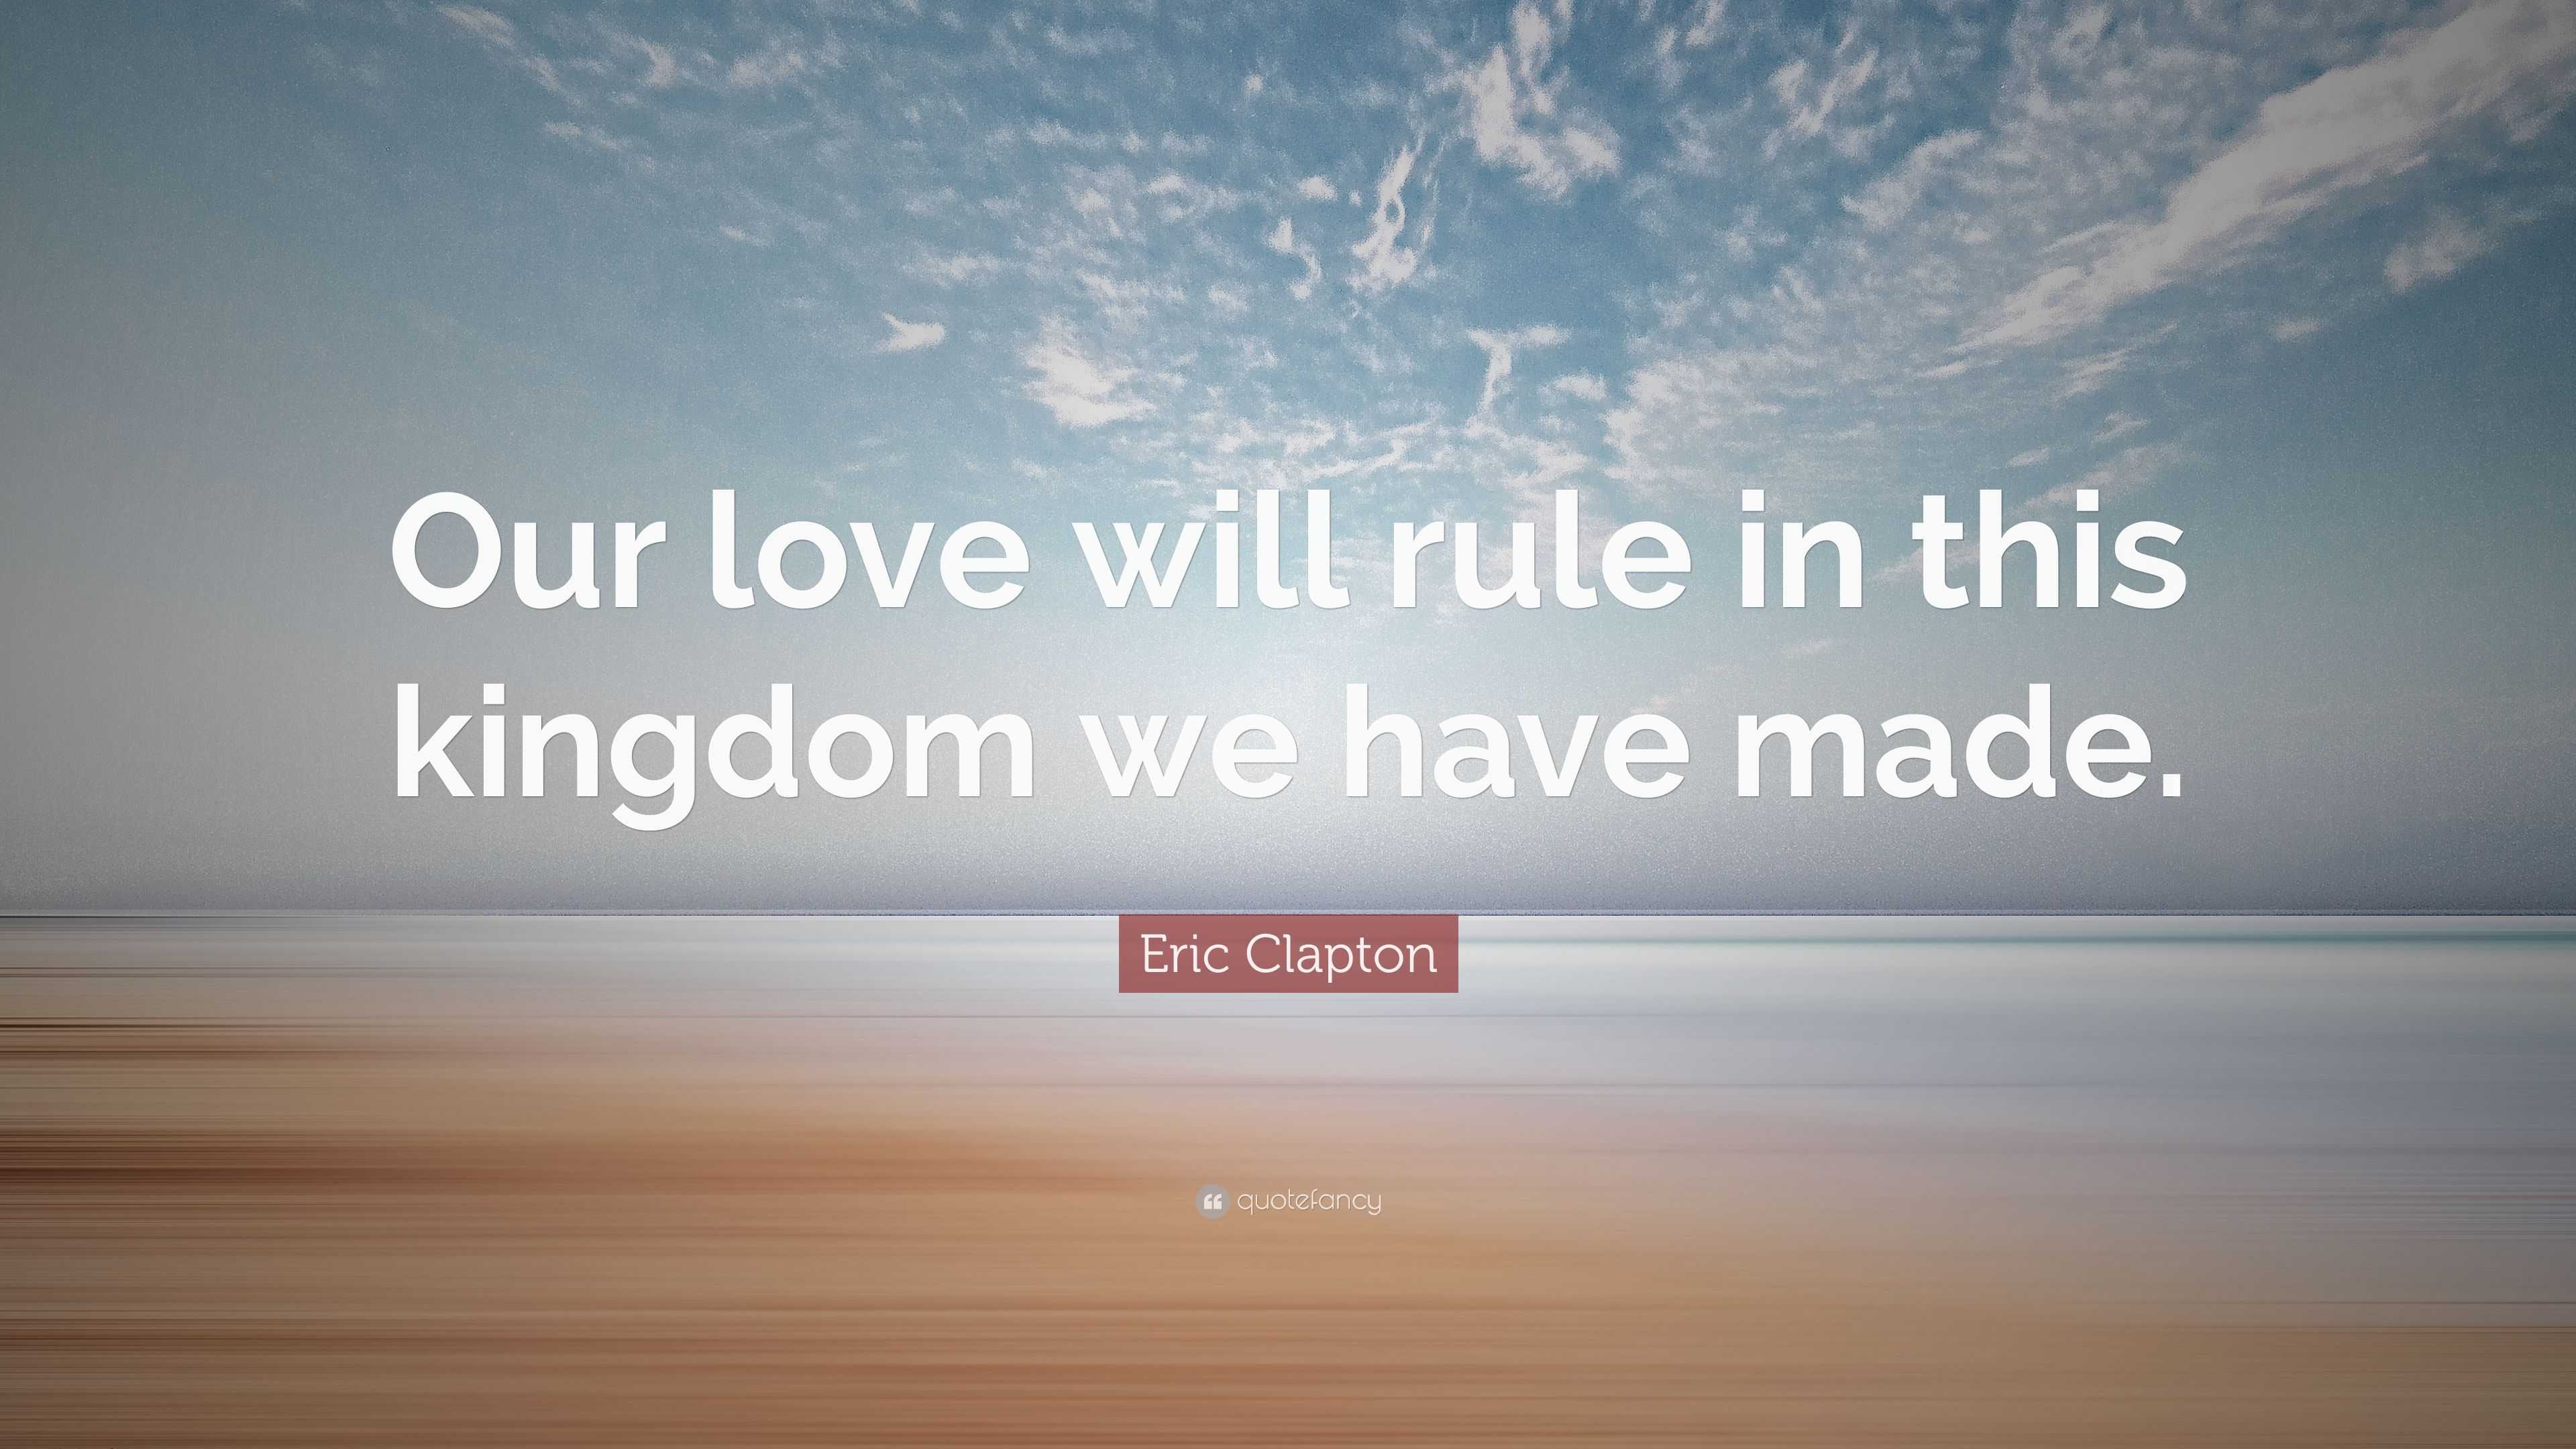 Our Kingdom - Love Quotes